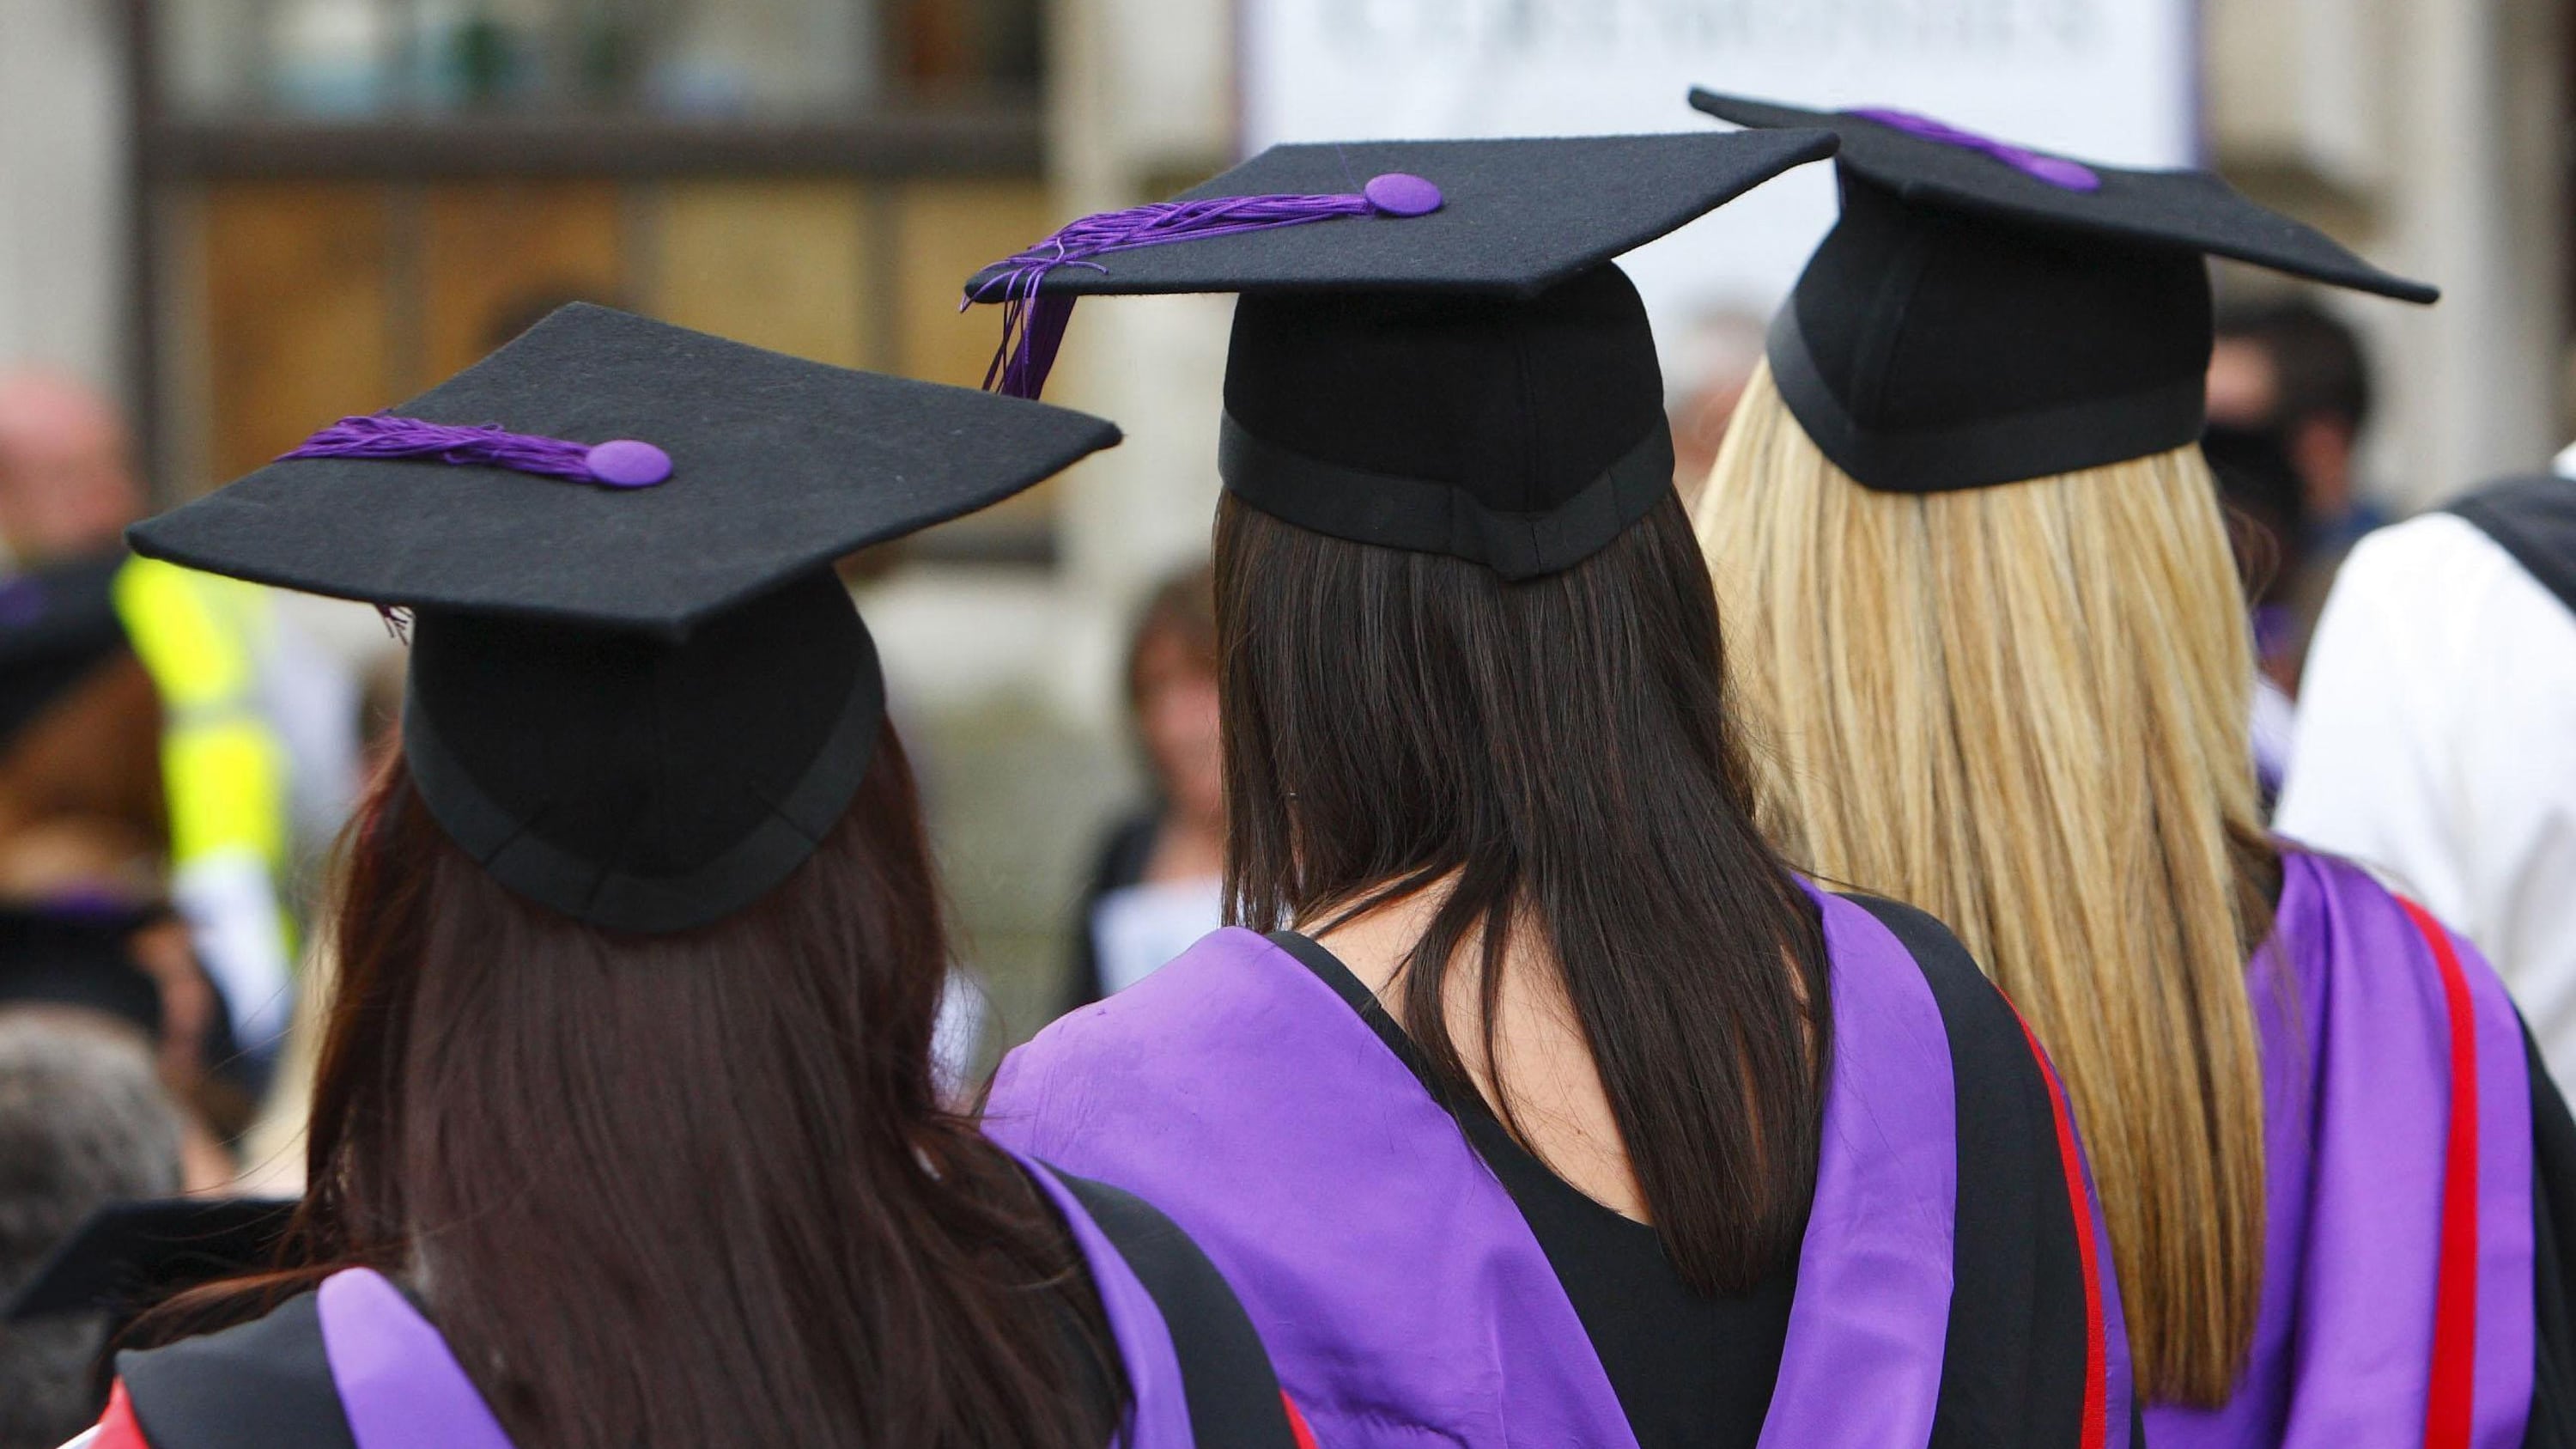 The UK’s graduate visa route is ‘not undermining’ the integrity and quality of the higher education system and should remain, the Government’s migration advisers have said